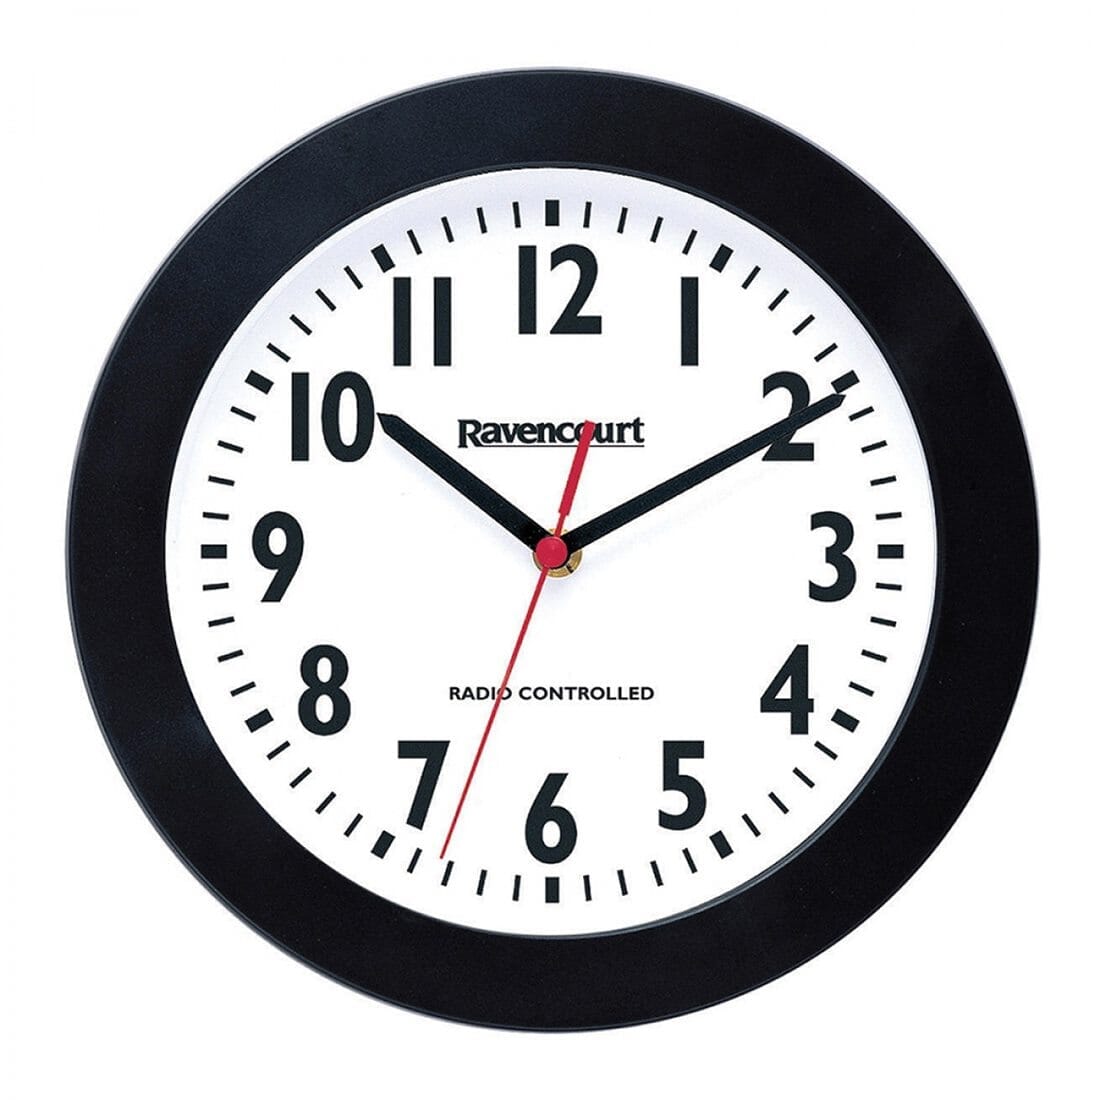 View Radio Controlled Wall Clock information